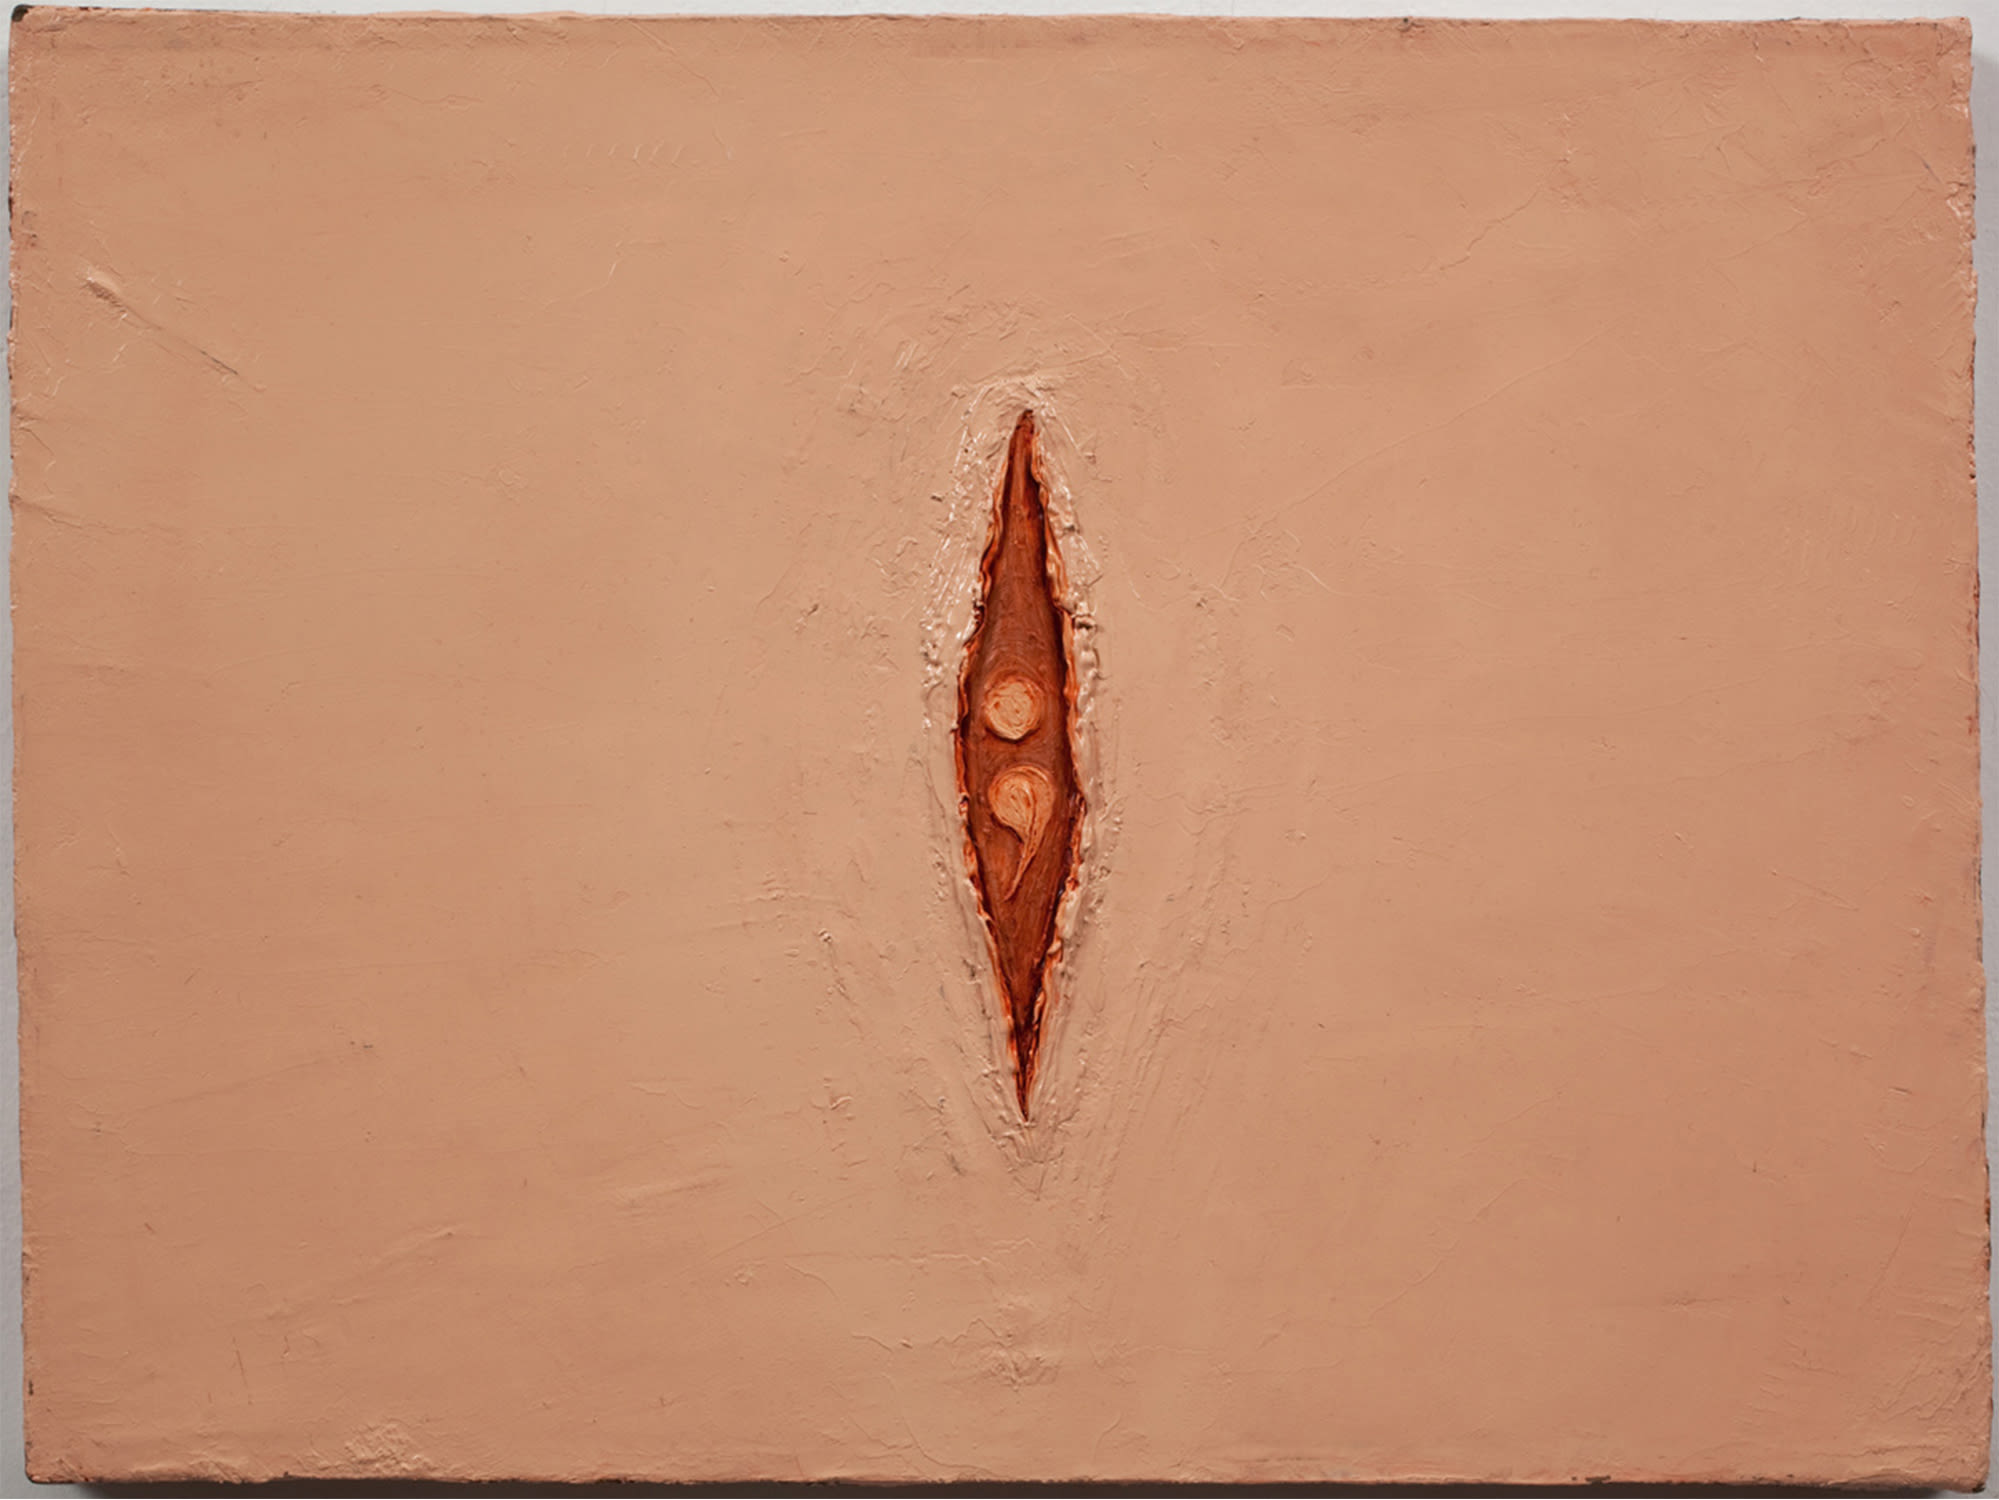 Mira Schor, Slit of Paint, 1994. Courtesy of the artist and Lyles & King, New York City.